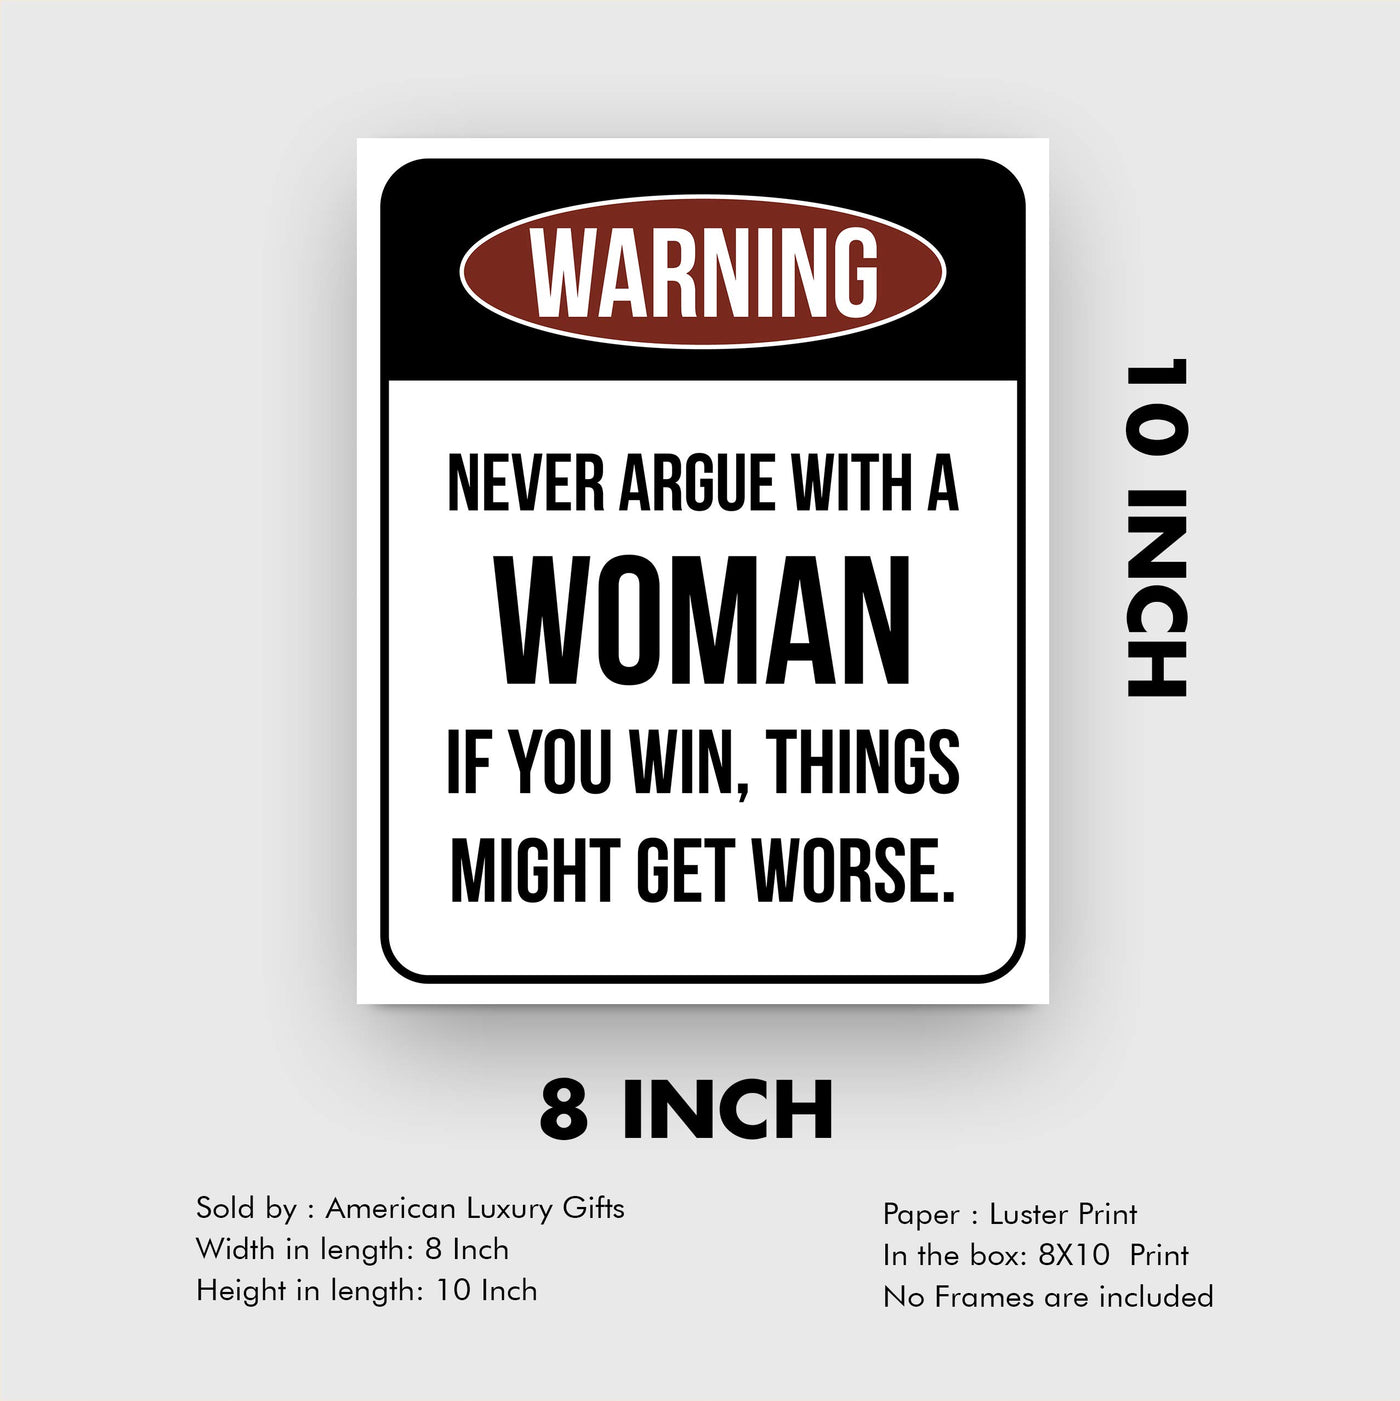 Never Argue With a Woman-If You Win Might Get Worse Funny Wall Sign -8 x 10" Sarcastic Art Print-Ready to Frame. Humorous Home-Office-Bar-Shop-Cave Decor. Fun Novelty Gift! Printed on Photo Paper.